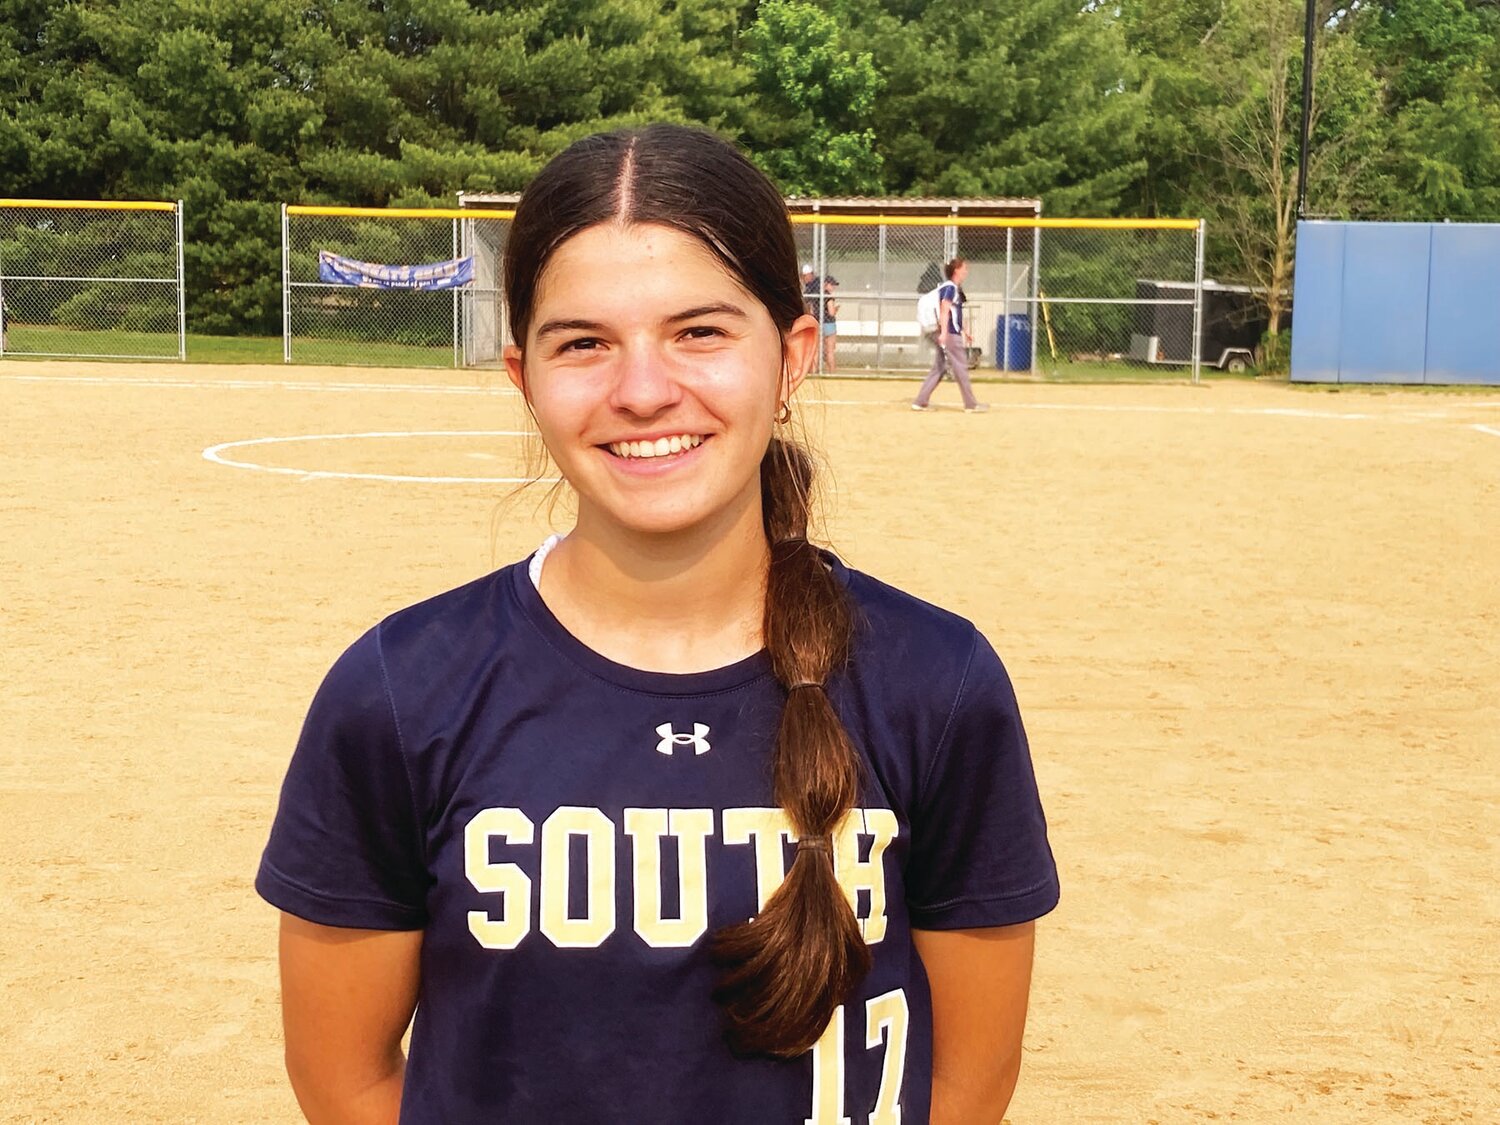 Council Rock South’s Lexi Waring pitched a complete-game one-hitter in a 6-0 District One playoff win over CR North.